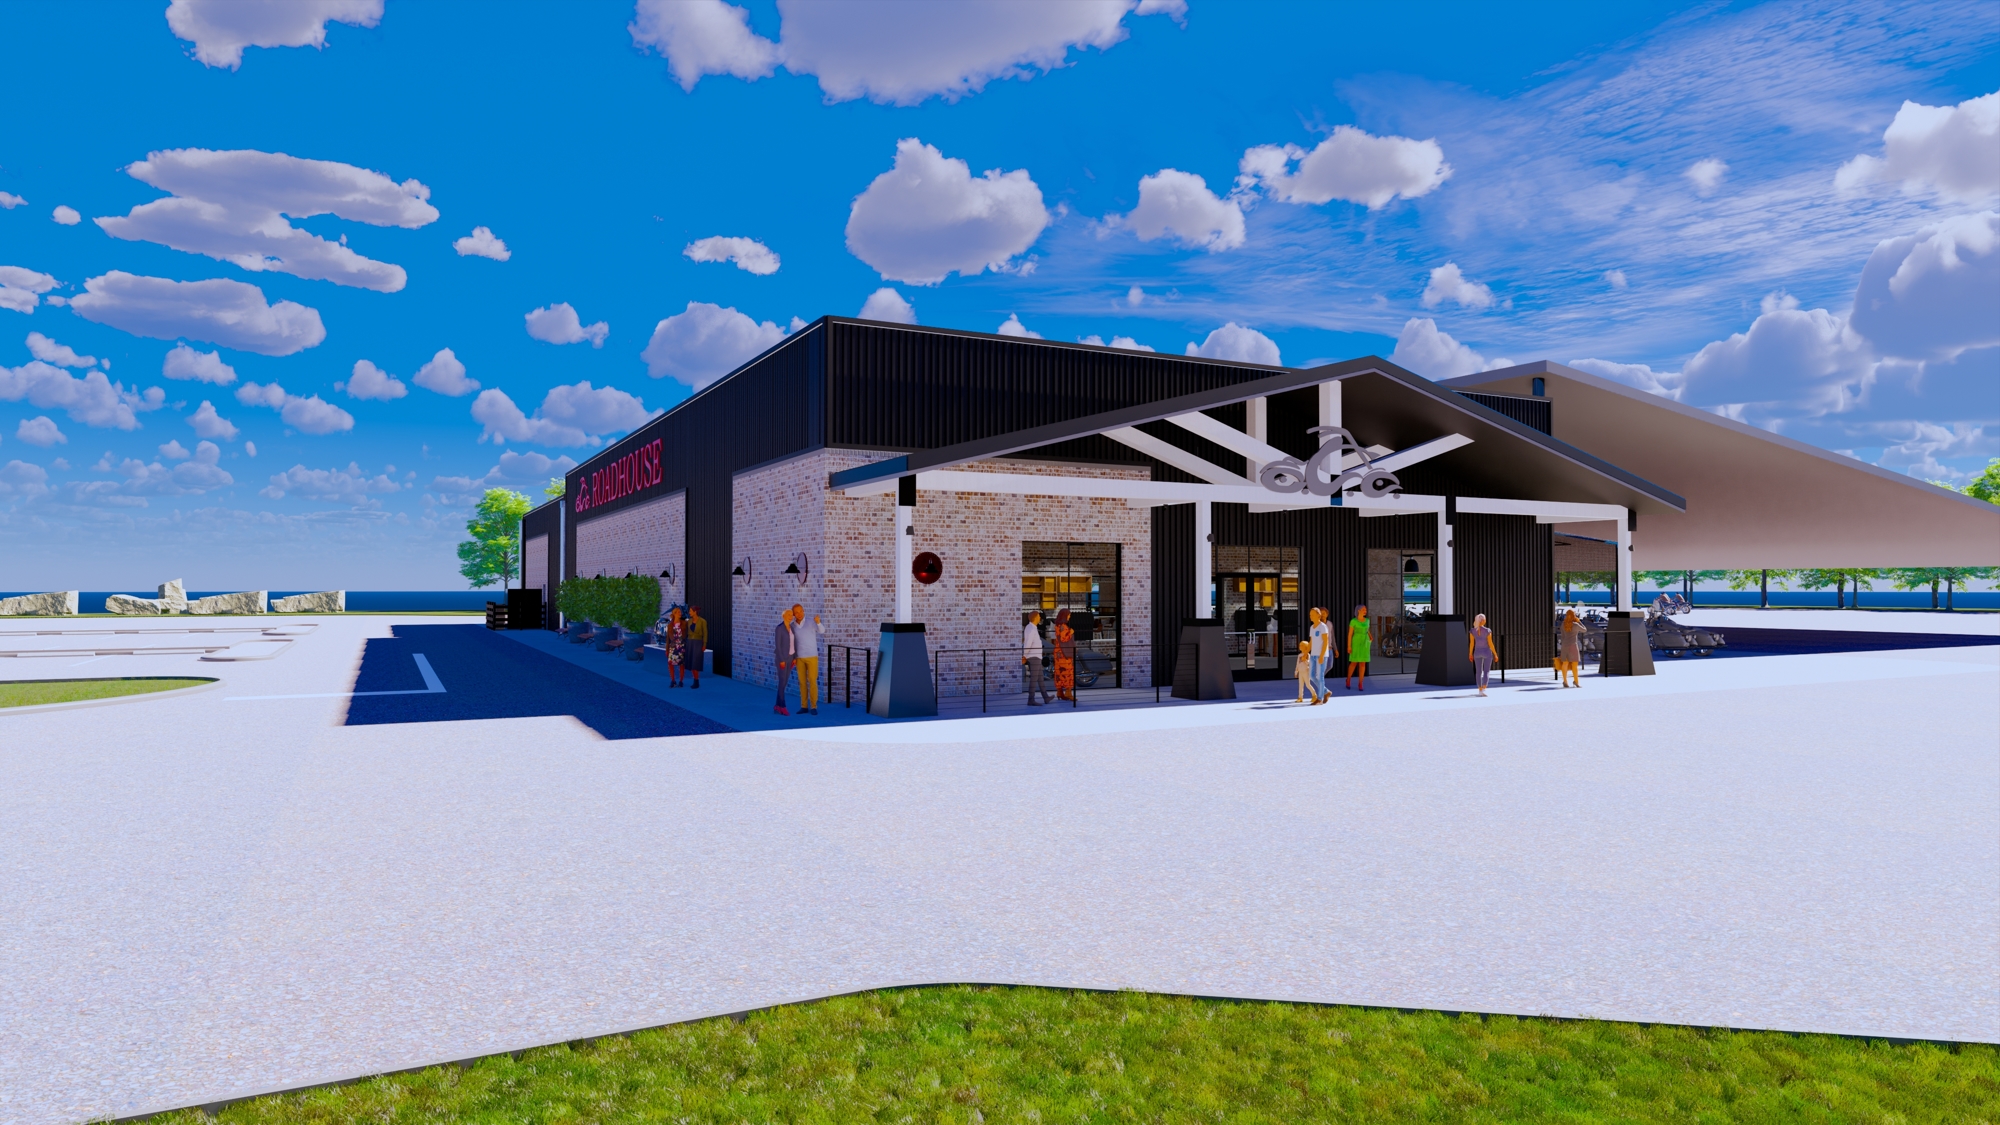 Courtesy. An artist's rendering of the OCC Roadhouse & Museum exterior.